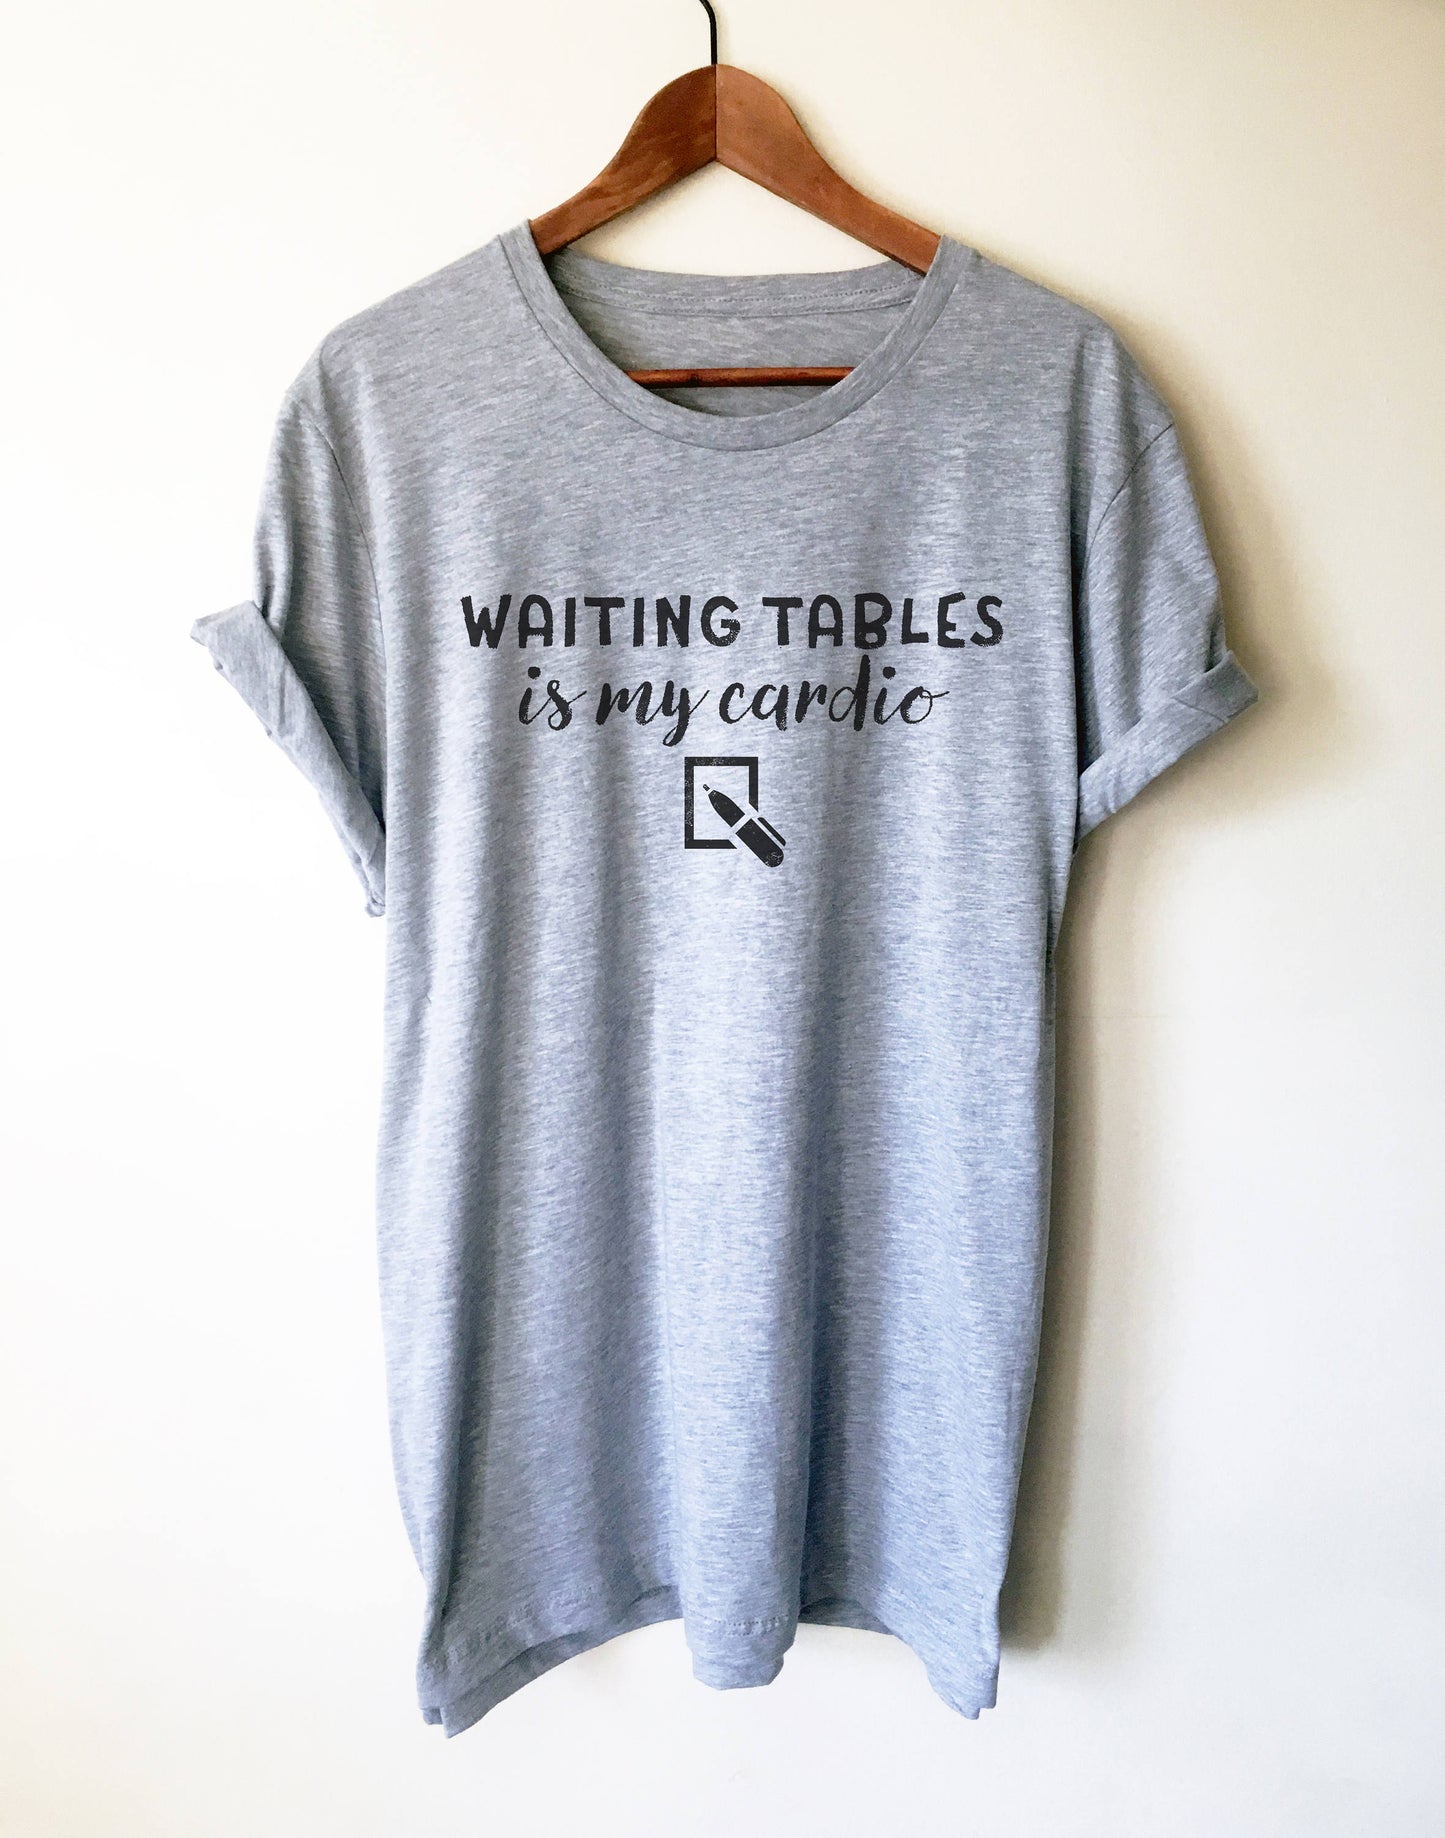 Waiting Tables Is My Cardio Unisex Shirt - Waitress Shirt, Waitress Gift, Waiter Shirt, Gift For Waitress, Bartender Shirt, Bartending